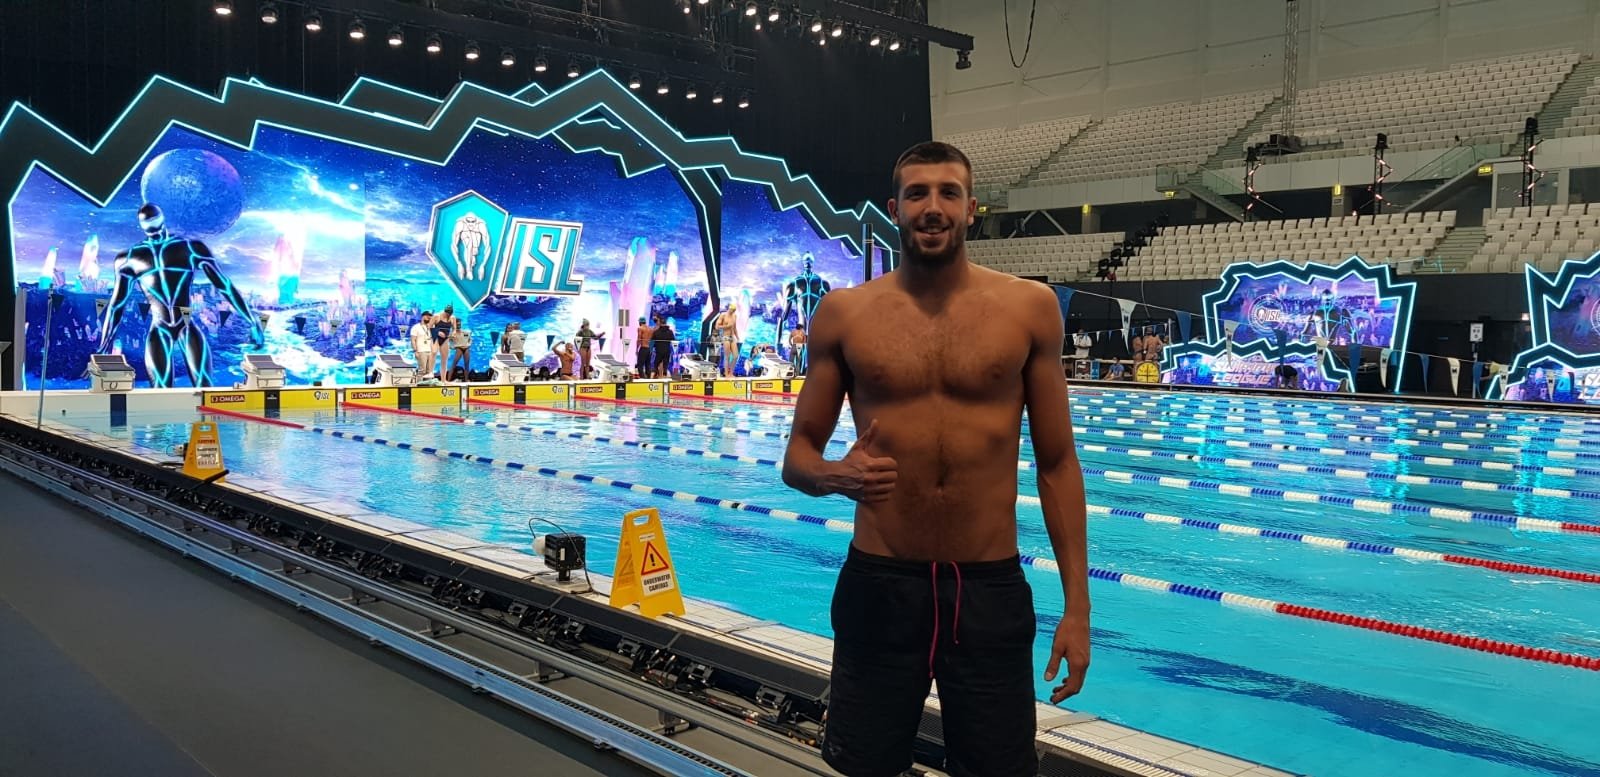 Turkish swimmer Emre Sakçı poses for a photo during the International Swimming League (ISL) competition in Budapest, Hungary, Nov. 17, 2020. (DHA Photo)